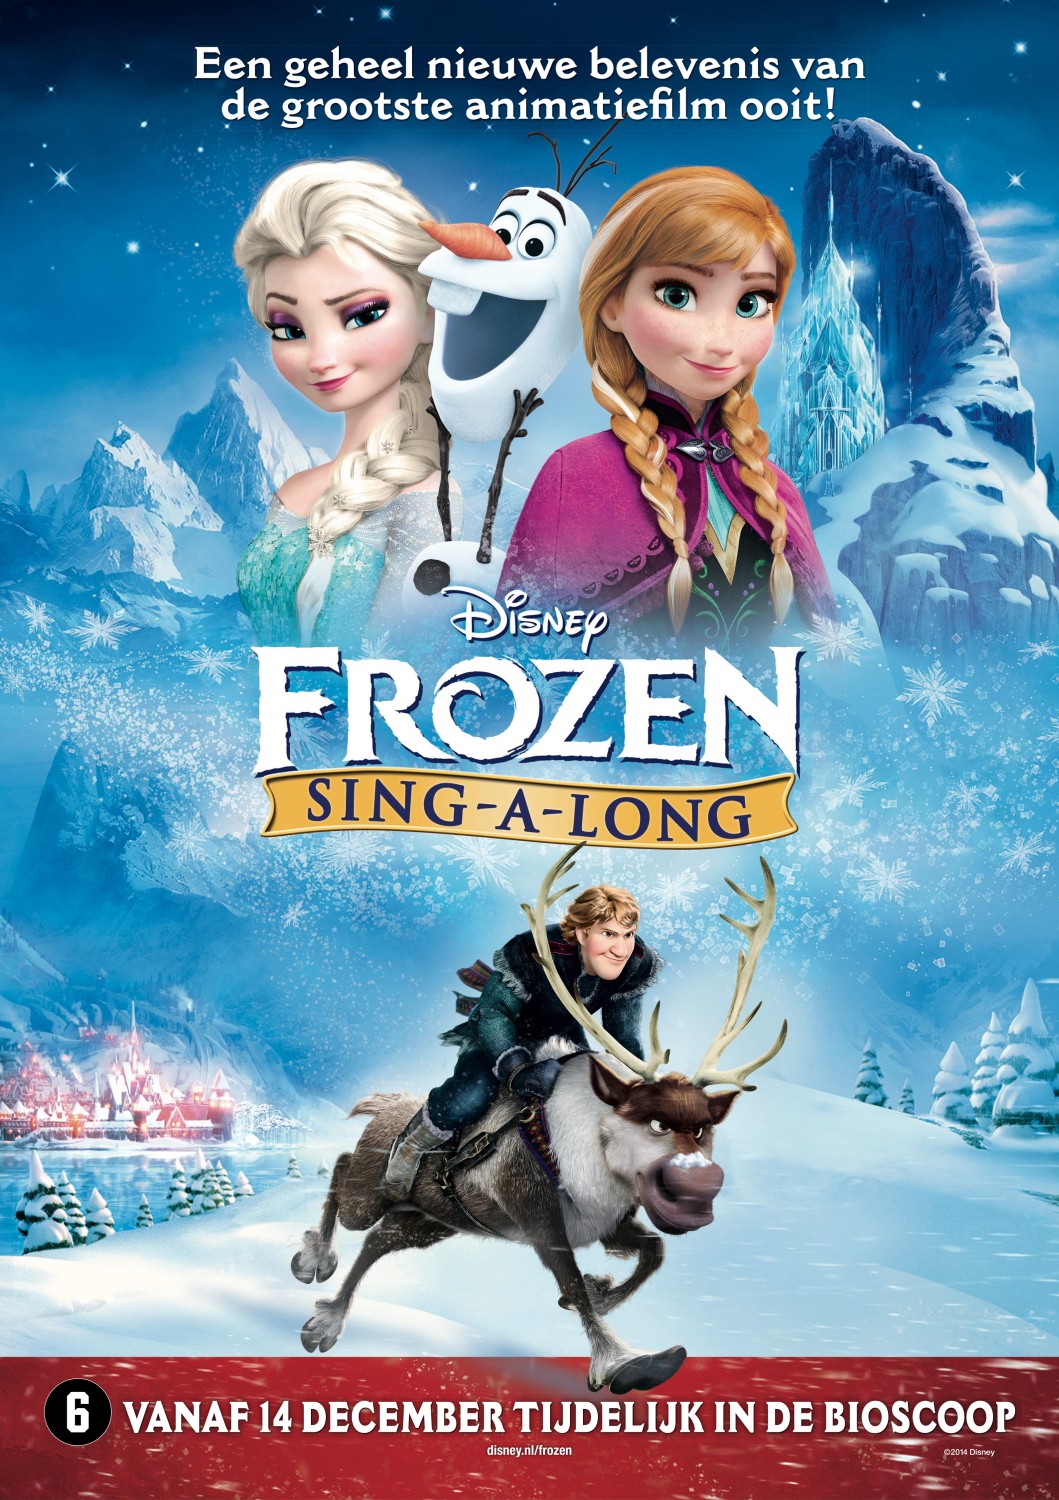 Extra Large Movie Poster Image for Frozen (#22 of 22)